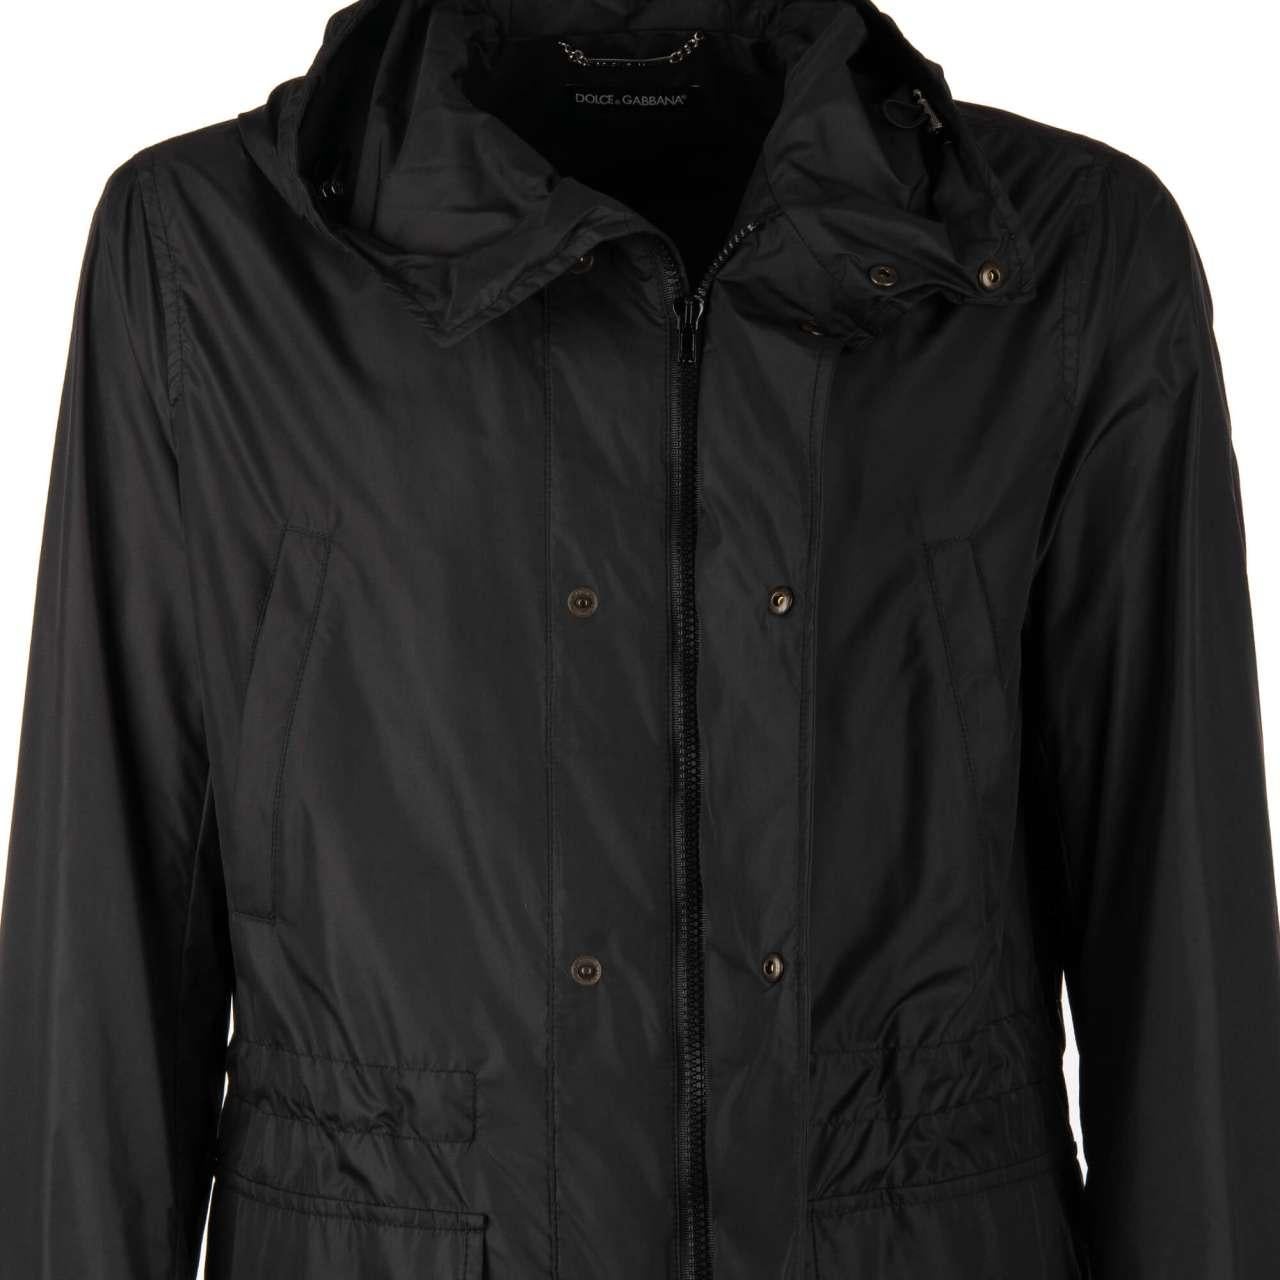 Dolce & Gabbana Classic Rain Parka Jacket with Pockets and Hoody Black 44 For Sale 2